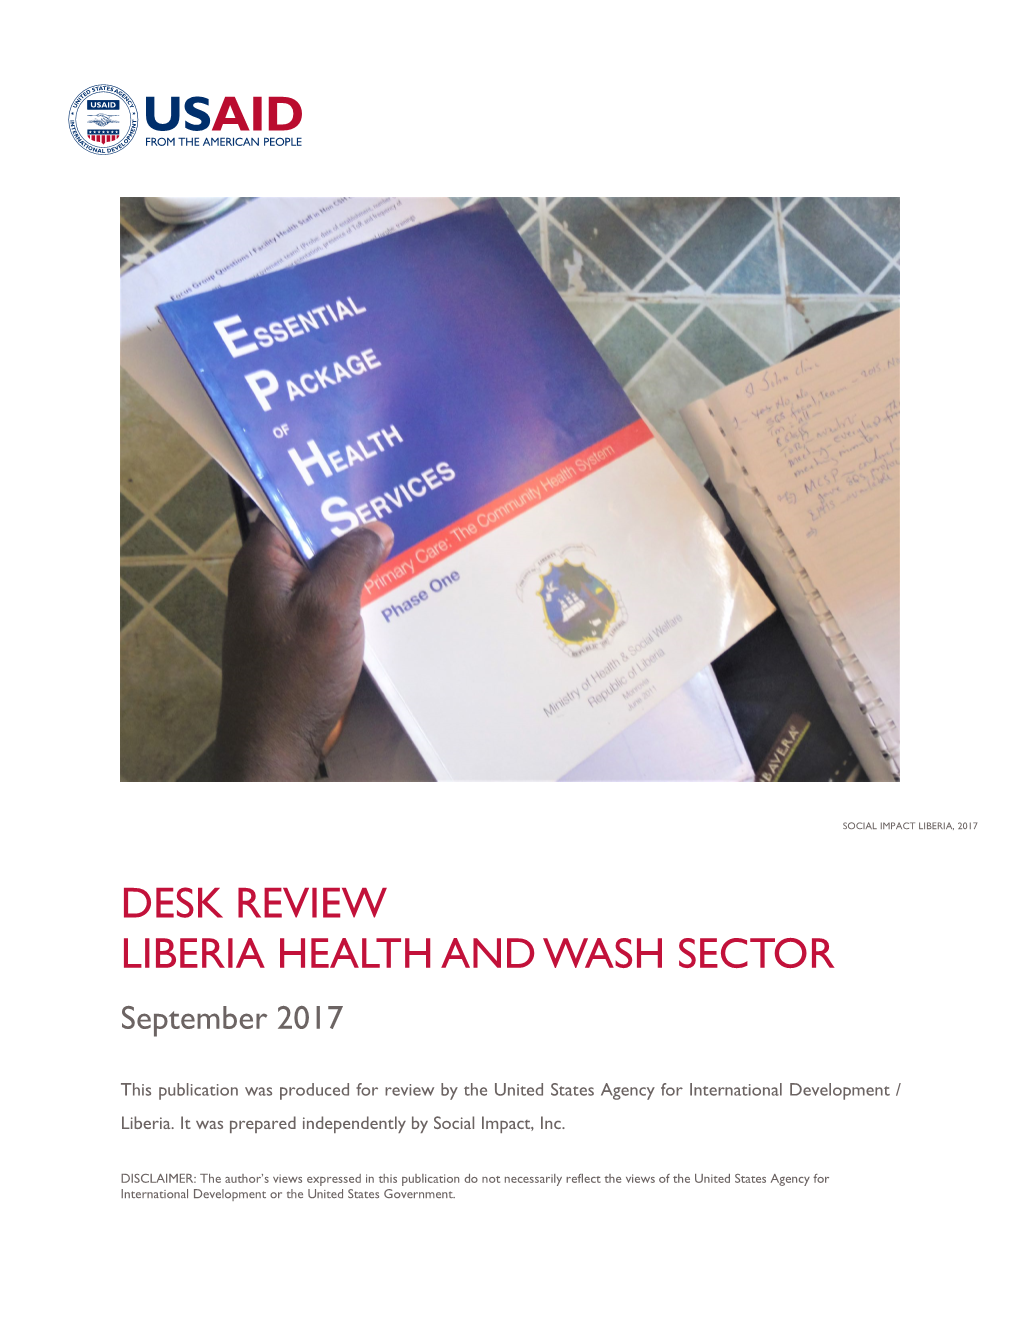 DESK REVIEW LIBERIA HEALTH and WASH SECTOR September 2017